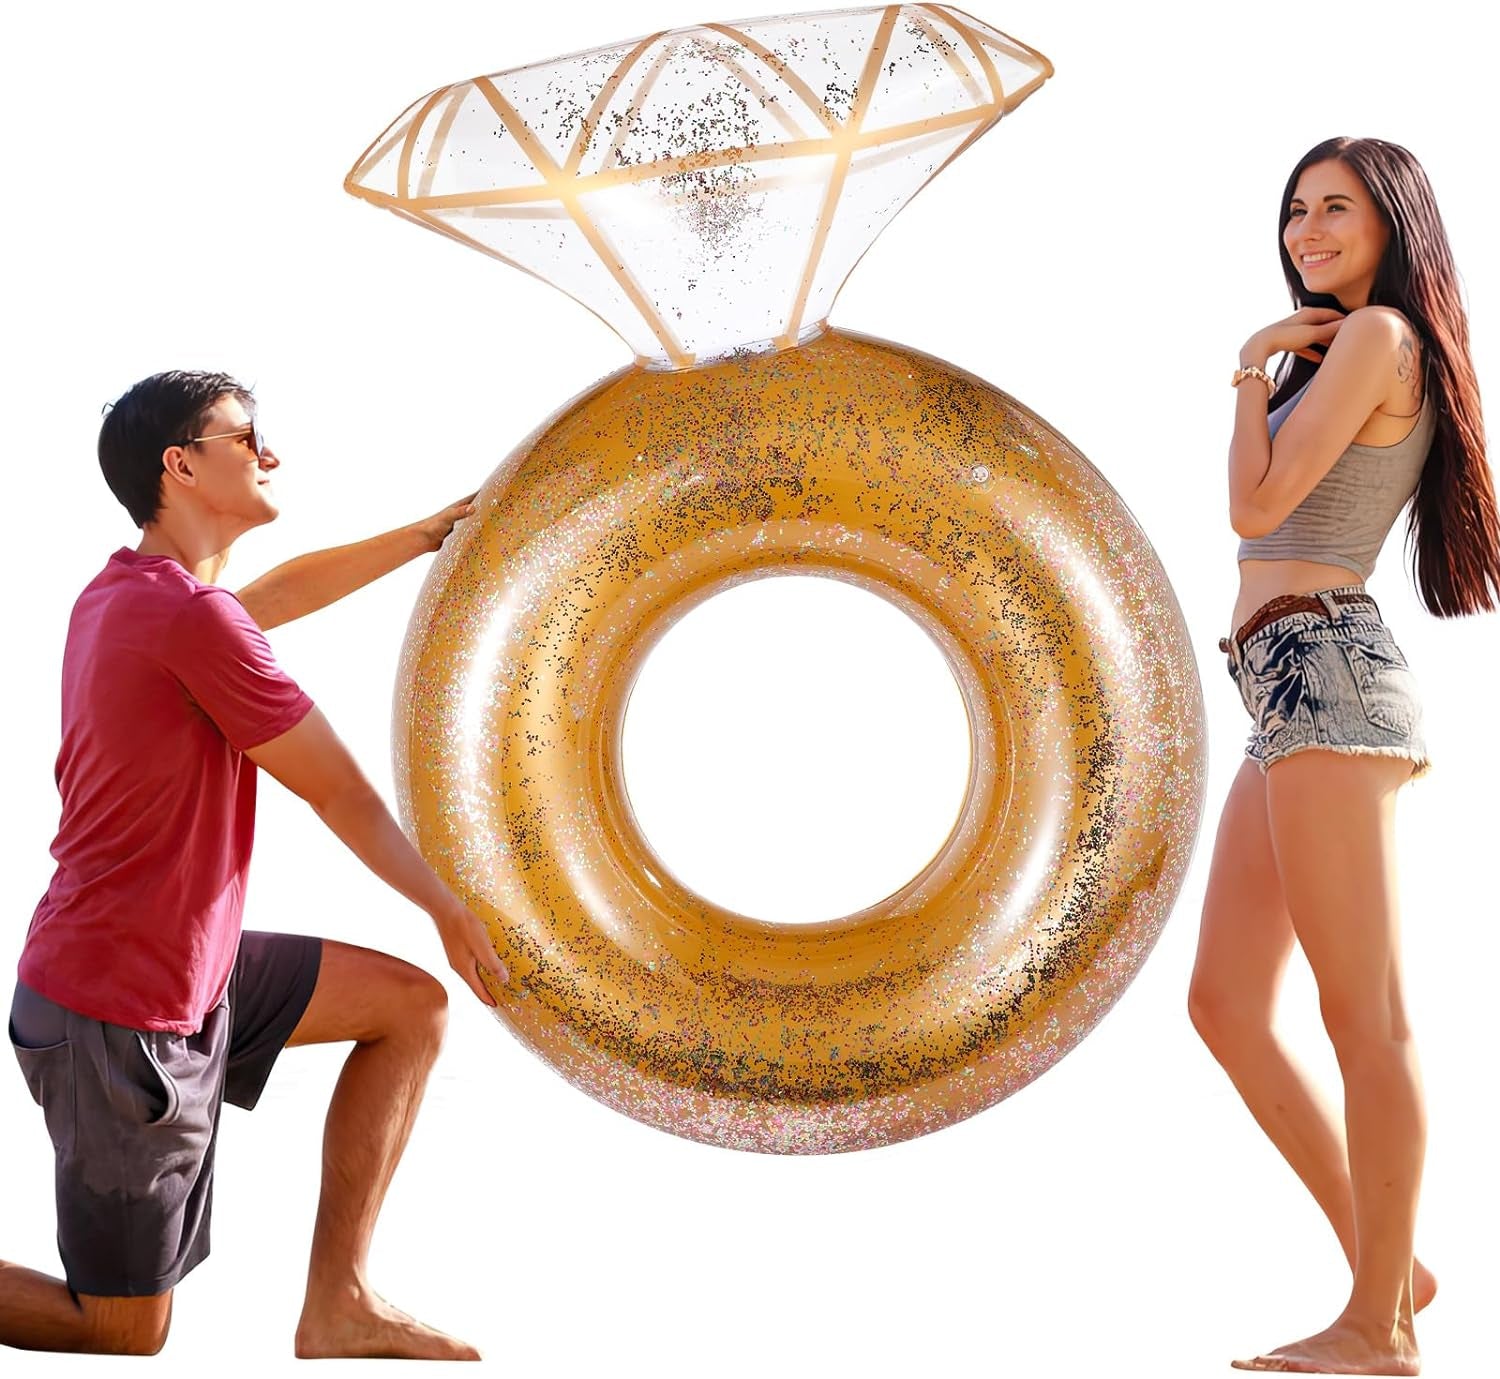 Pool Floats, Inflatable Diamond Ring Pool Float, Large Engagement Ring Floatie for Bachelorette Party, Swim Tube River Lake Wedding Bride Stagette Decor Fun Toy Raft for Adults & Kids